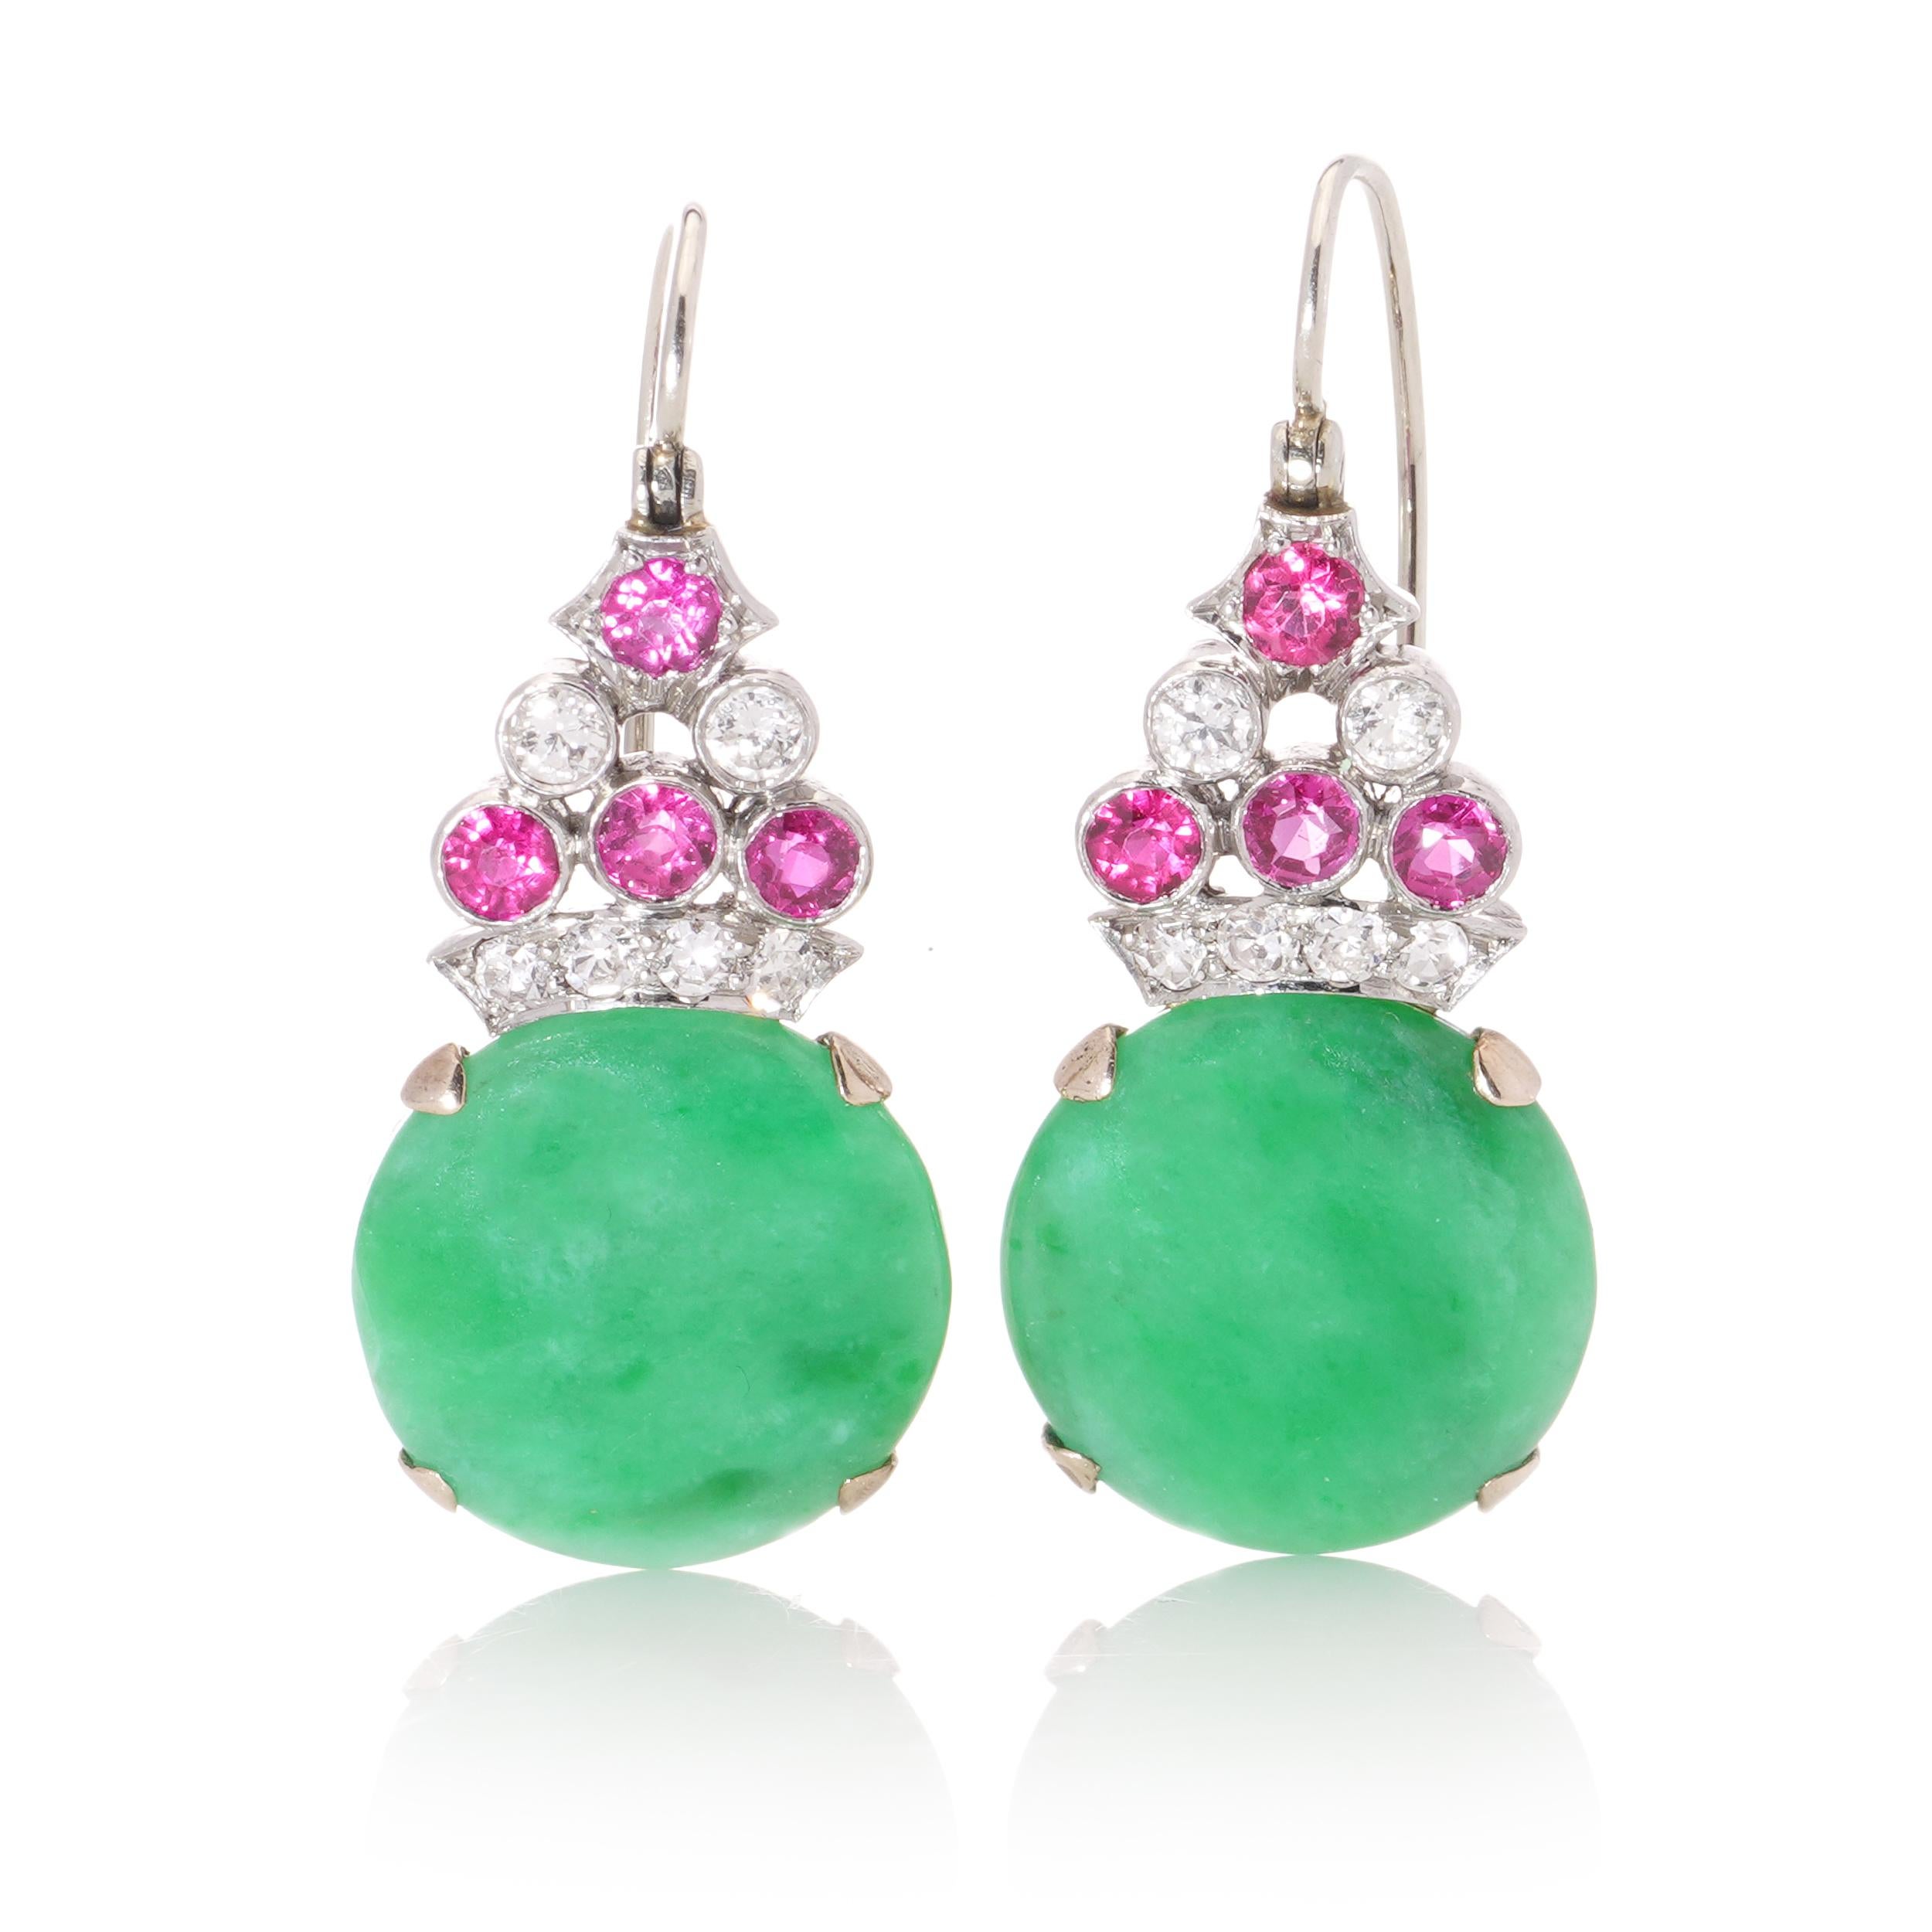 Brilliant Cut Vintage Platinum and 9kt. gold hook earrings with Jadeite, diamonds, and rubies.